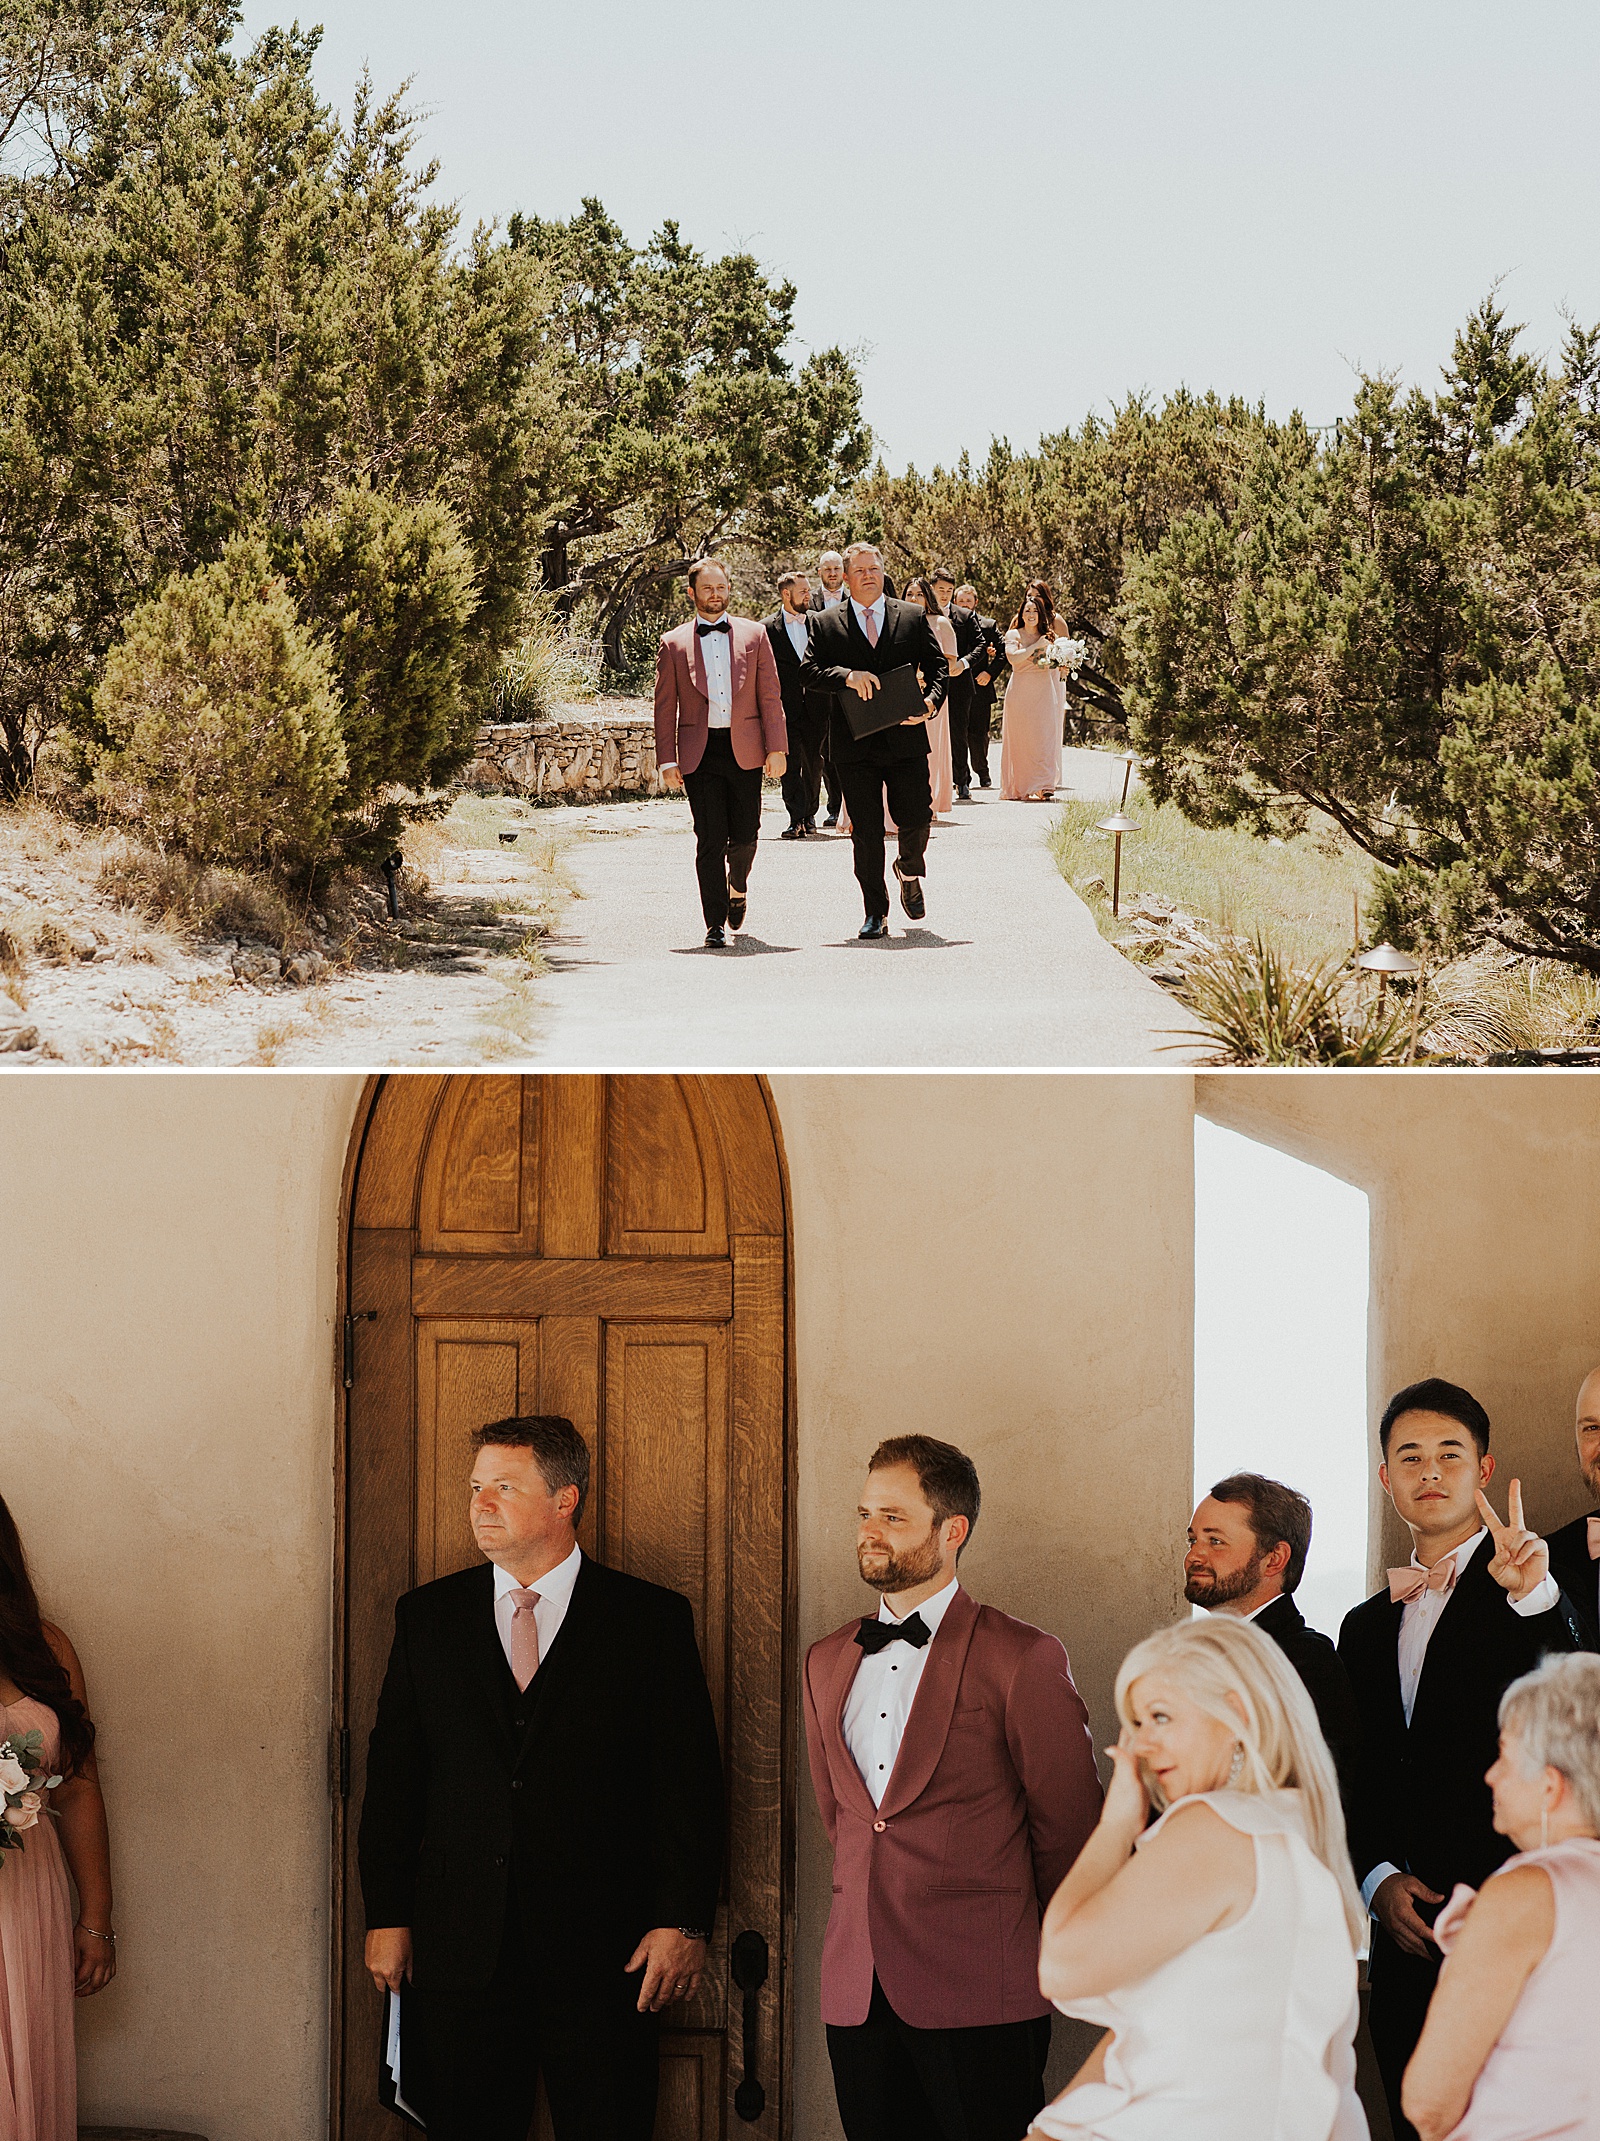 Sweet ceremony moments at this Austin TX wedding.